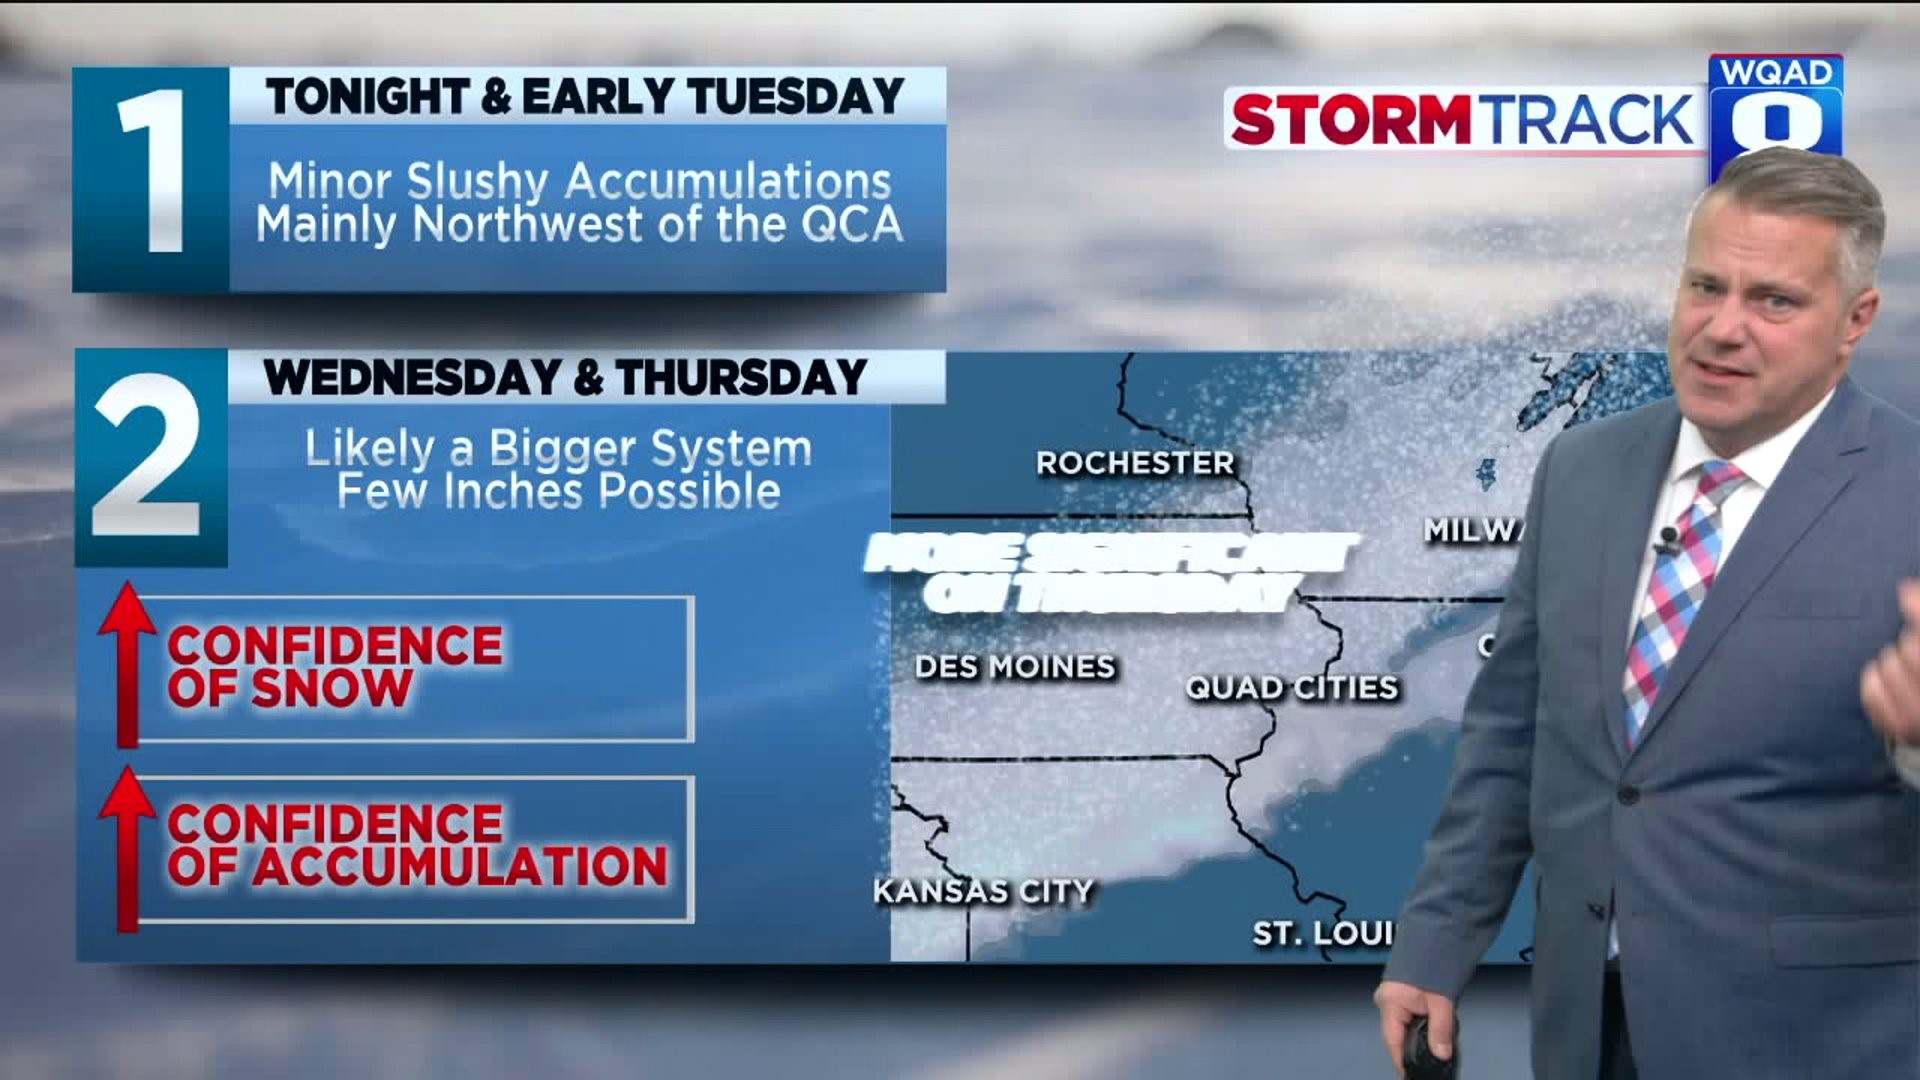 Eric is tracking two bouts of wintry weather this week